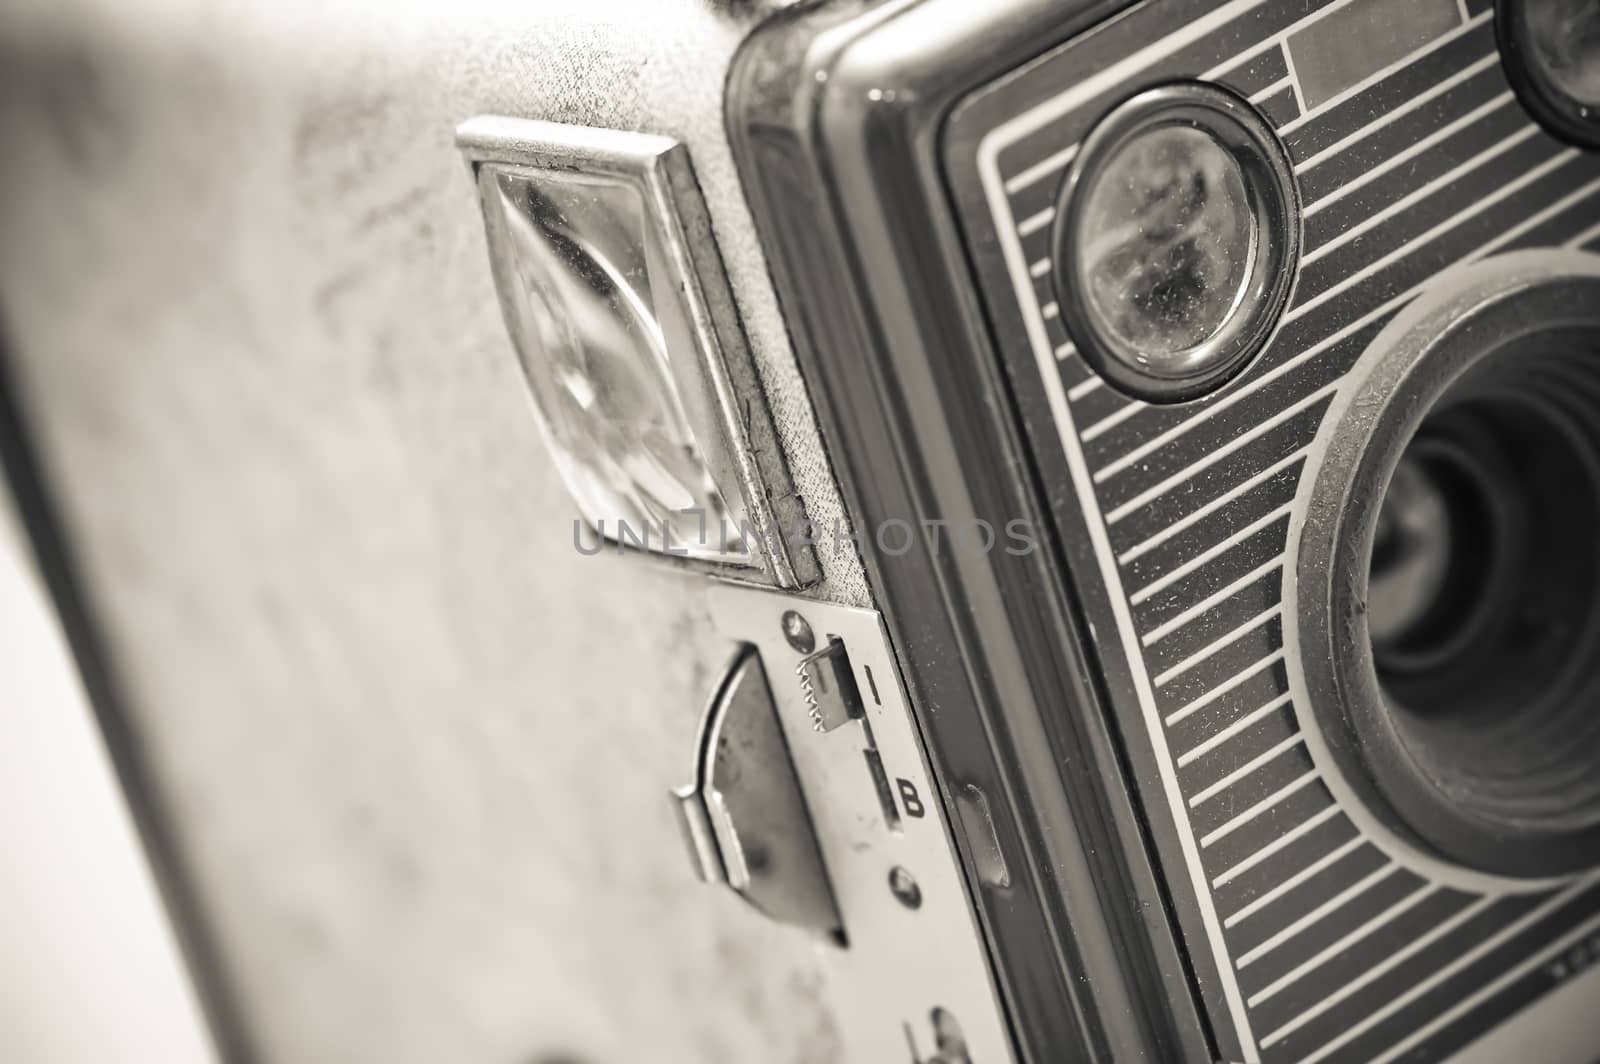 well used vintage box camera close up